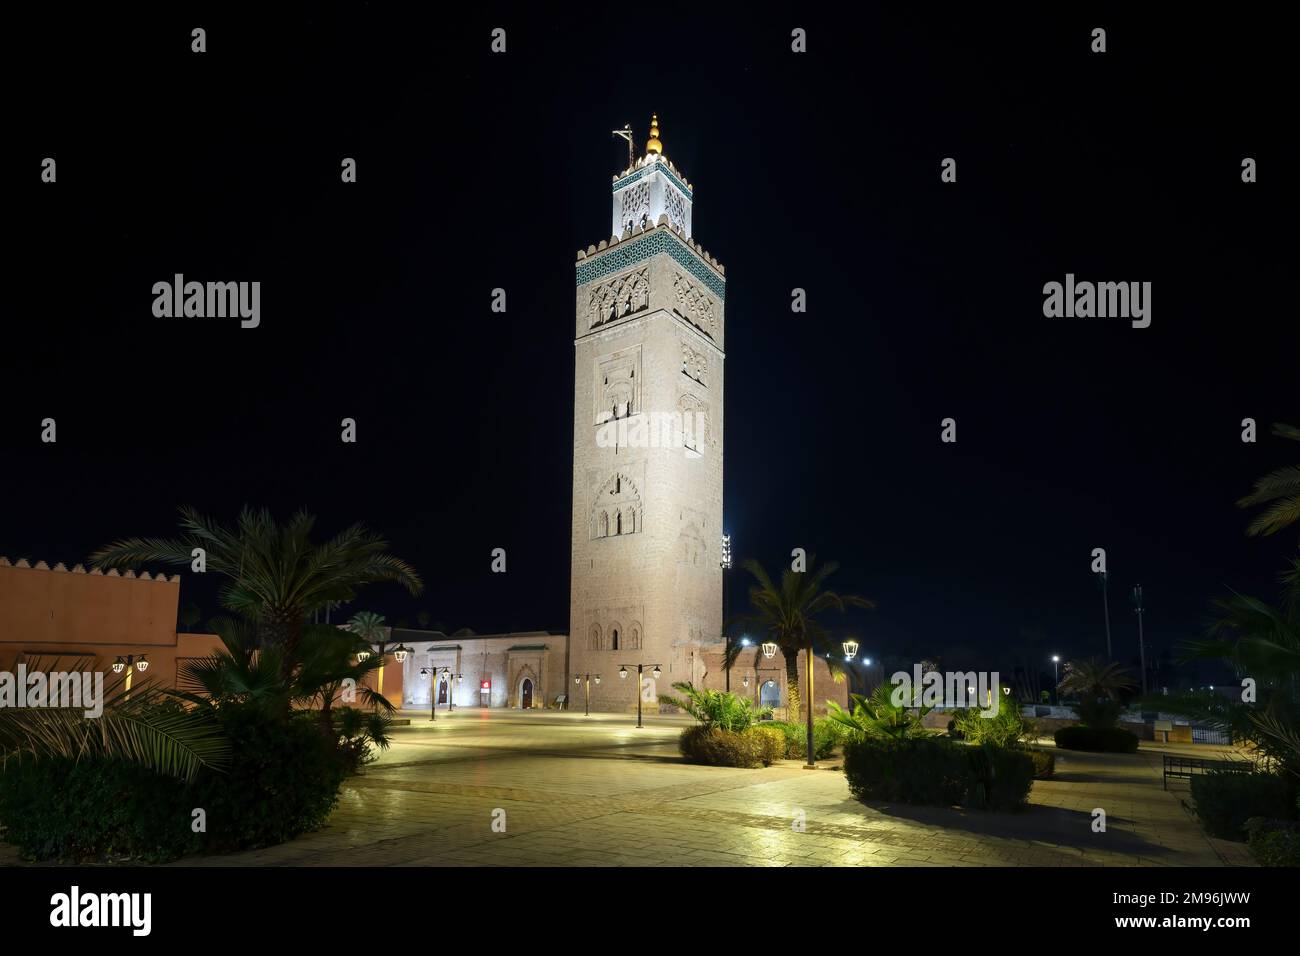 View of the famous Koutoubia Mosque at night, Marrakech, Morocco Stock Photo